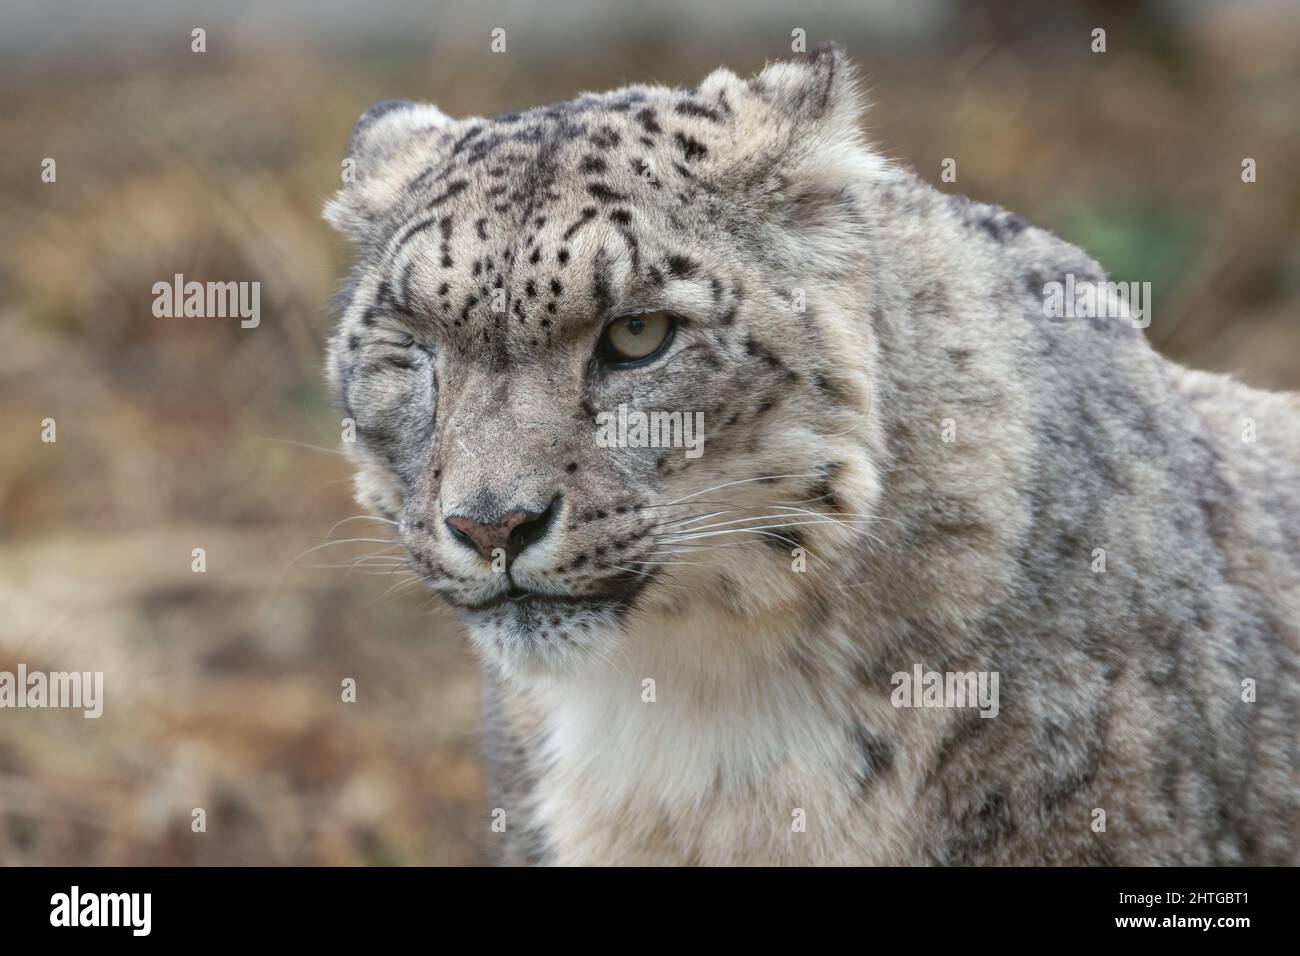 Snow leopard isolated against a blurry background. Beautiful big cat from the Himalayas. Stock Photo